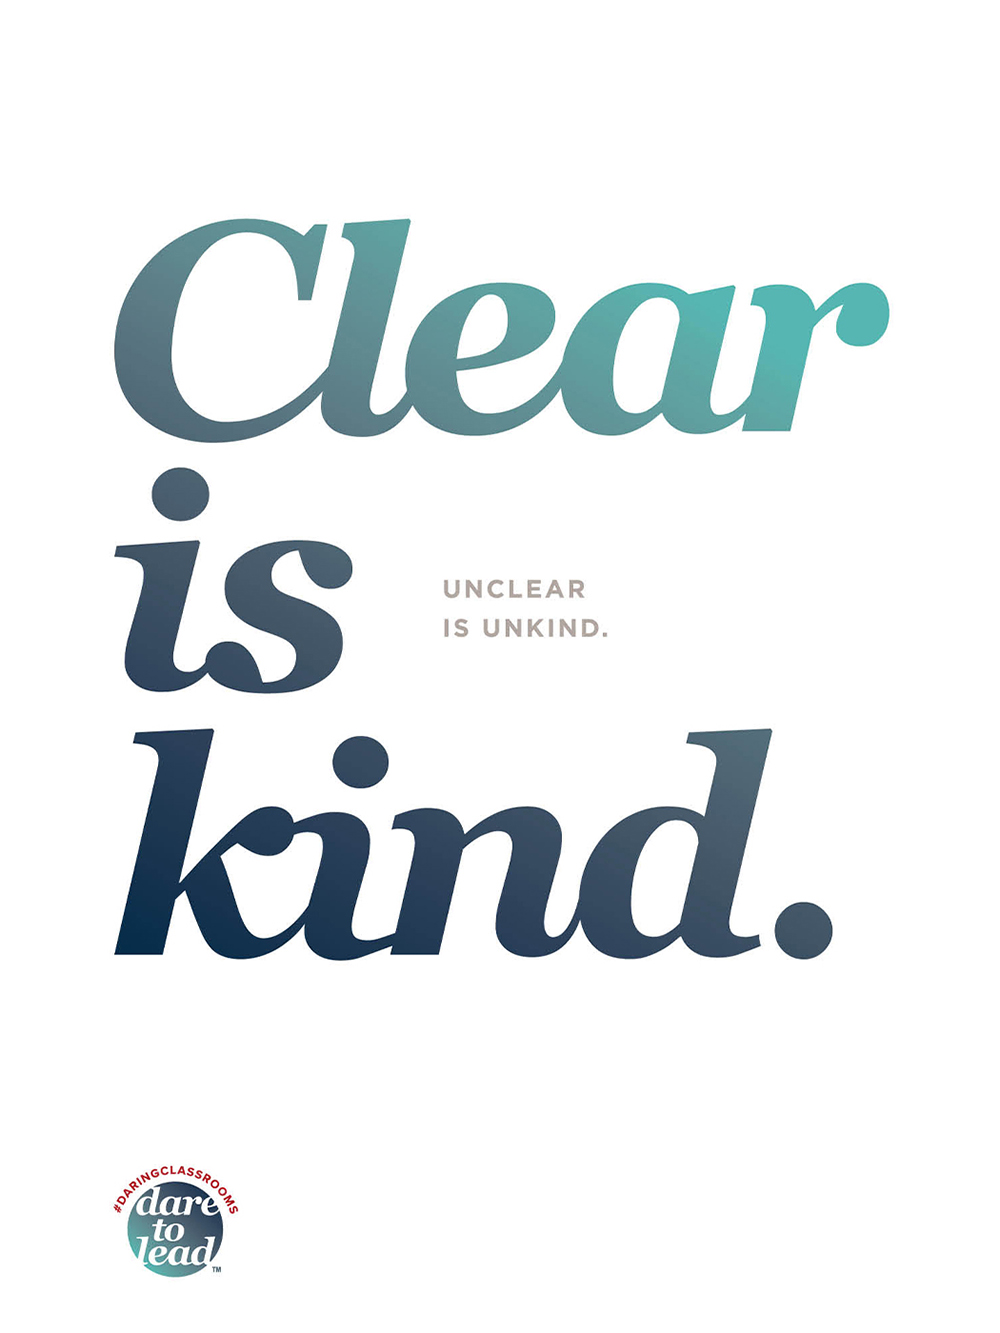 Clear is kind. Unclear is unkind.